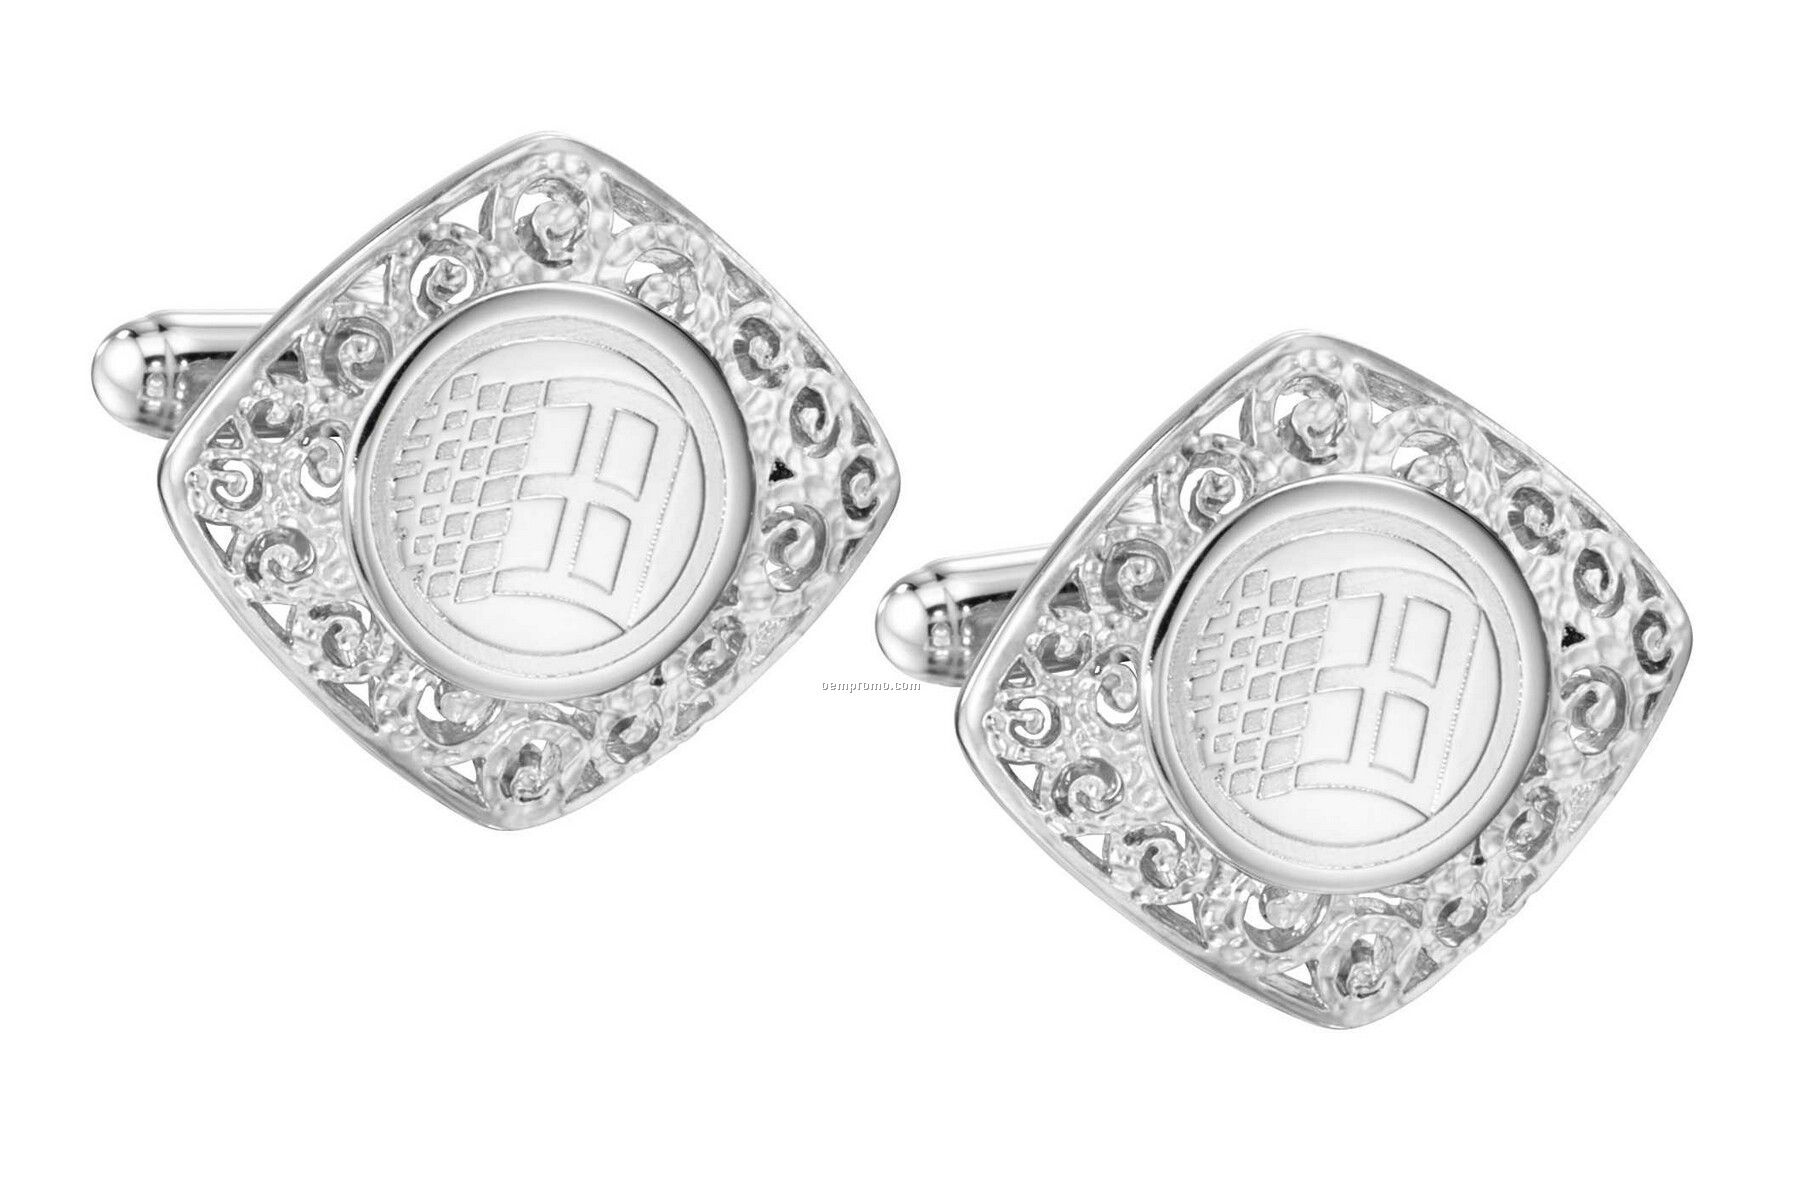 Ovations - Grandeur Silver Plated Cuff Links - Round Area For Laser Engrave